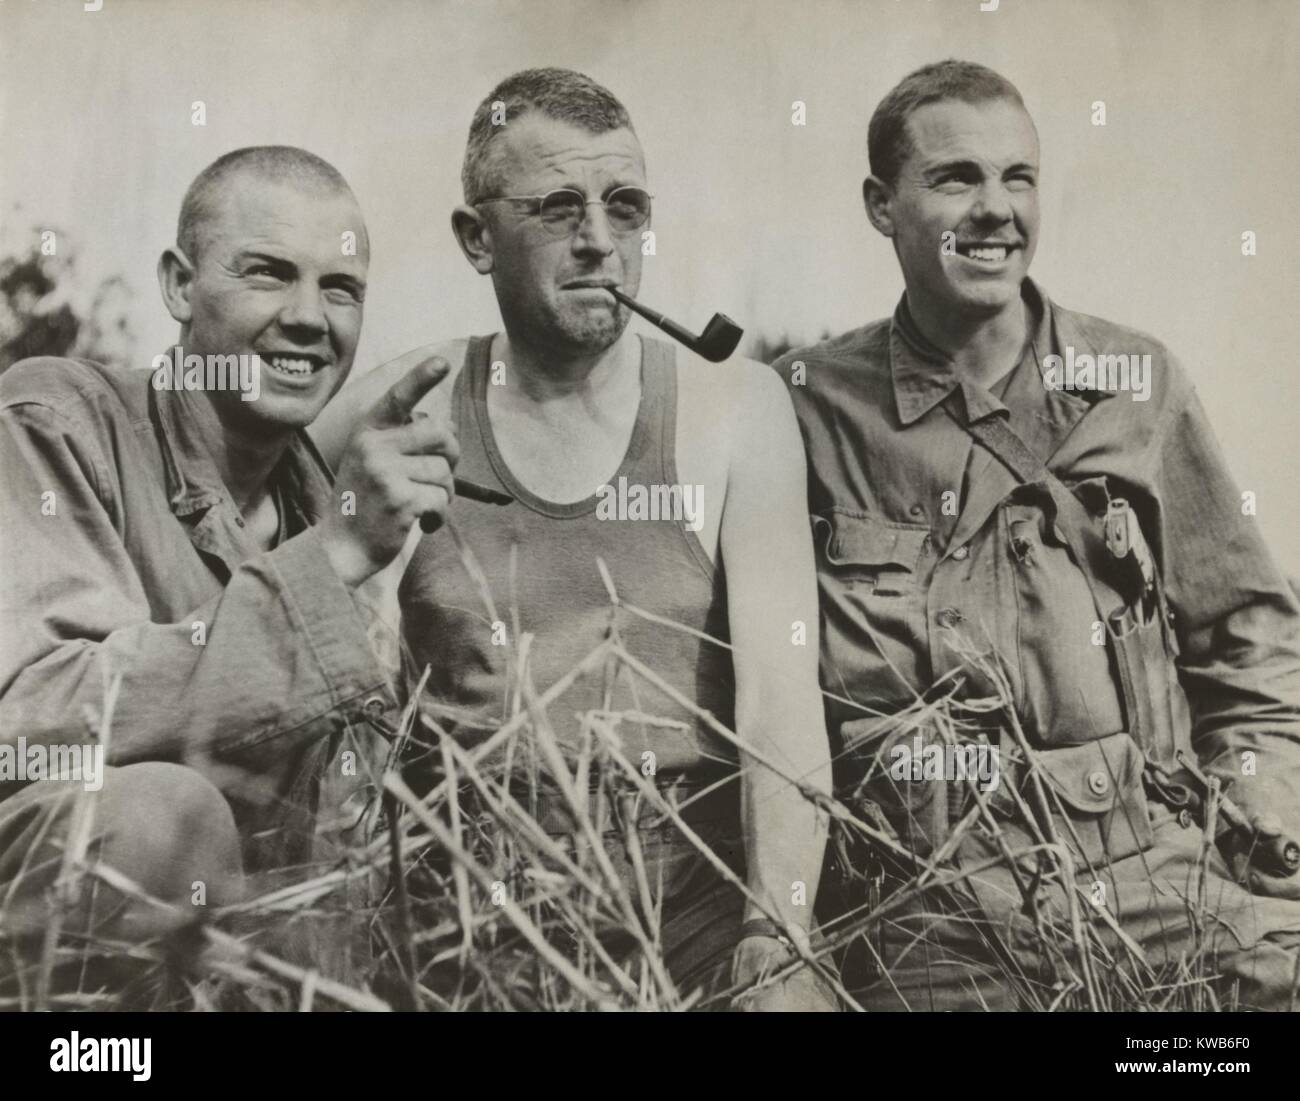 Brig. Gen. Frank Merrill flanked by the Higgins twins Elbert Viron (left) and Albert Byron in 1944. He commanded 'Merrill's Marauders', a special forces unit that operated behind Japanese lines in Burma during World War 2. (BSLOC 2014 8 133) Stock Photo